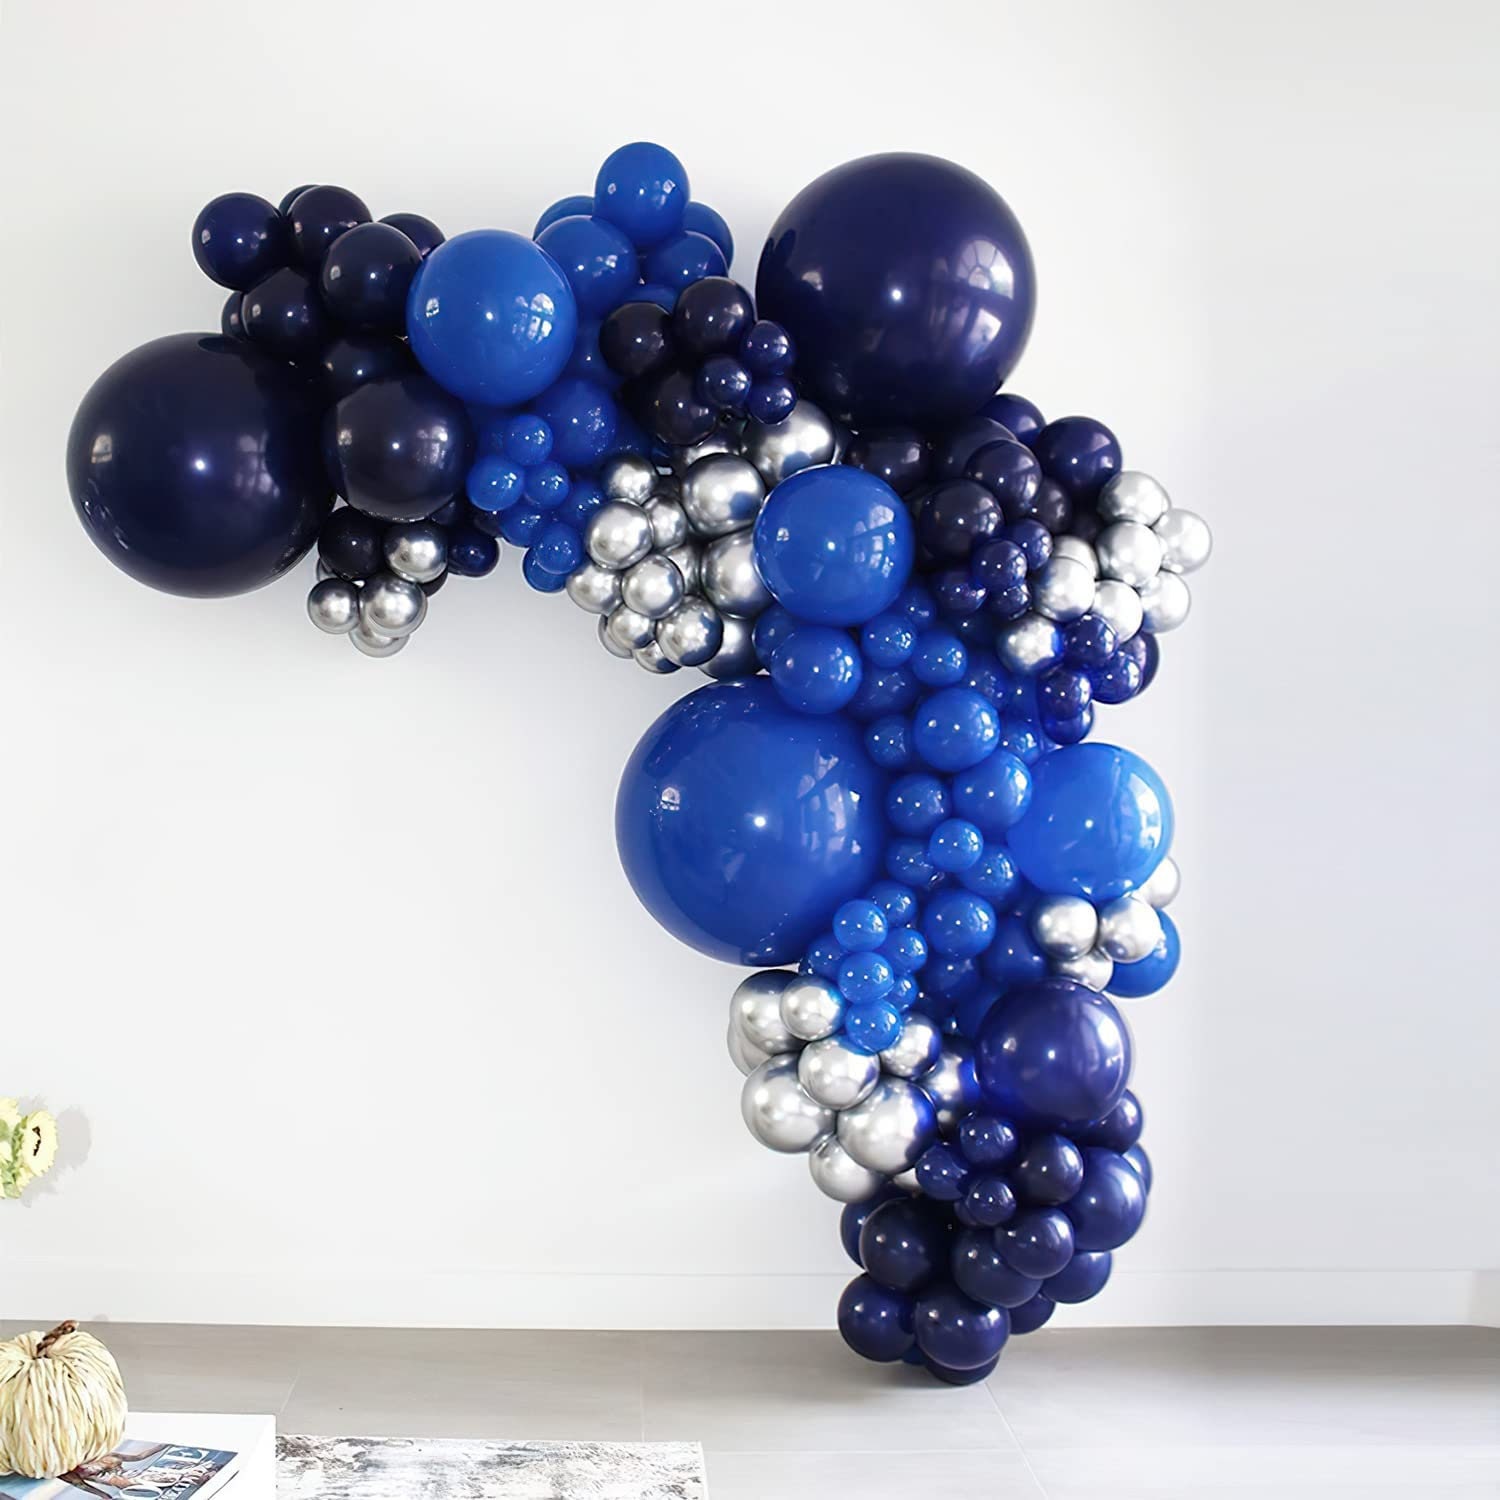 MMTX 100pcs Red White Blue Balloon Garland Kit, Royal Navy Blue Party  Decorations Spiderman Balloons for Boy Birthday Graduation Baby Shower